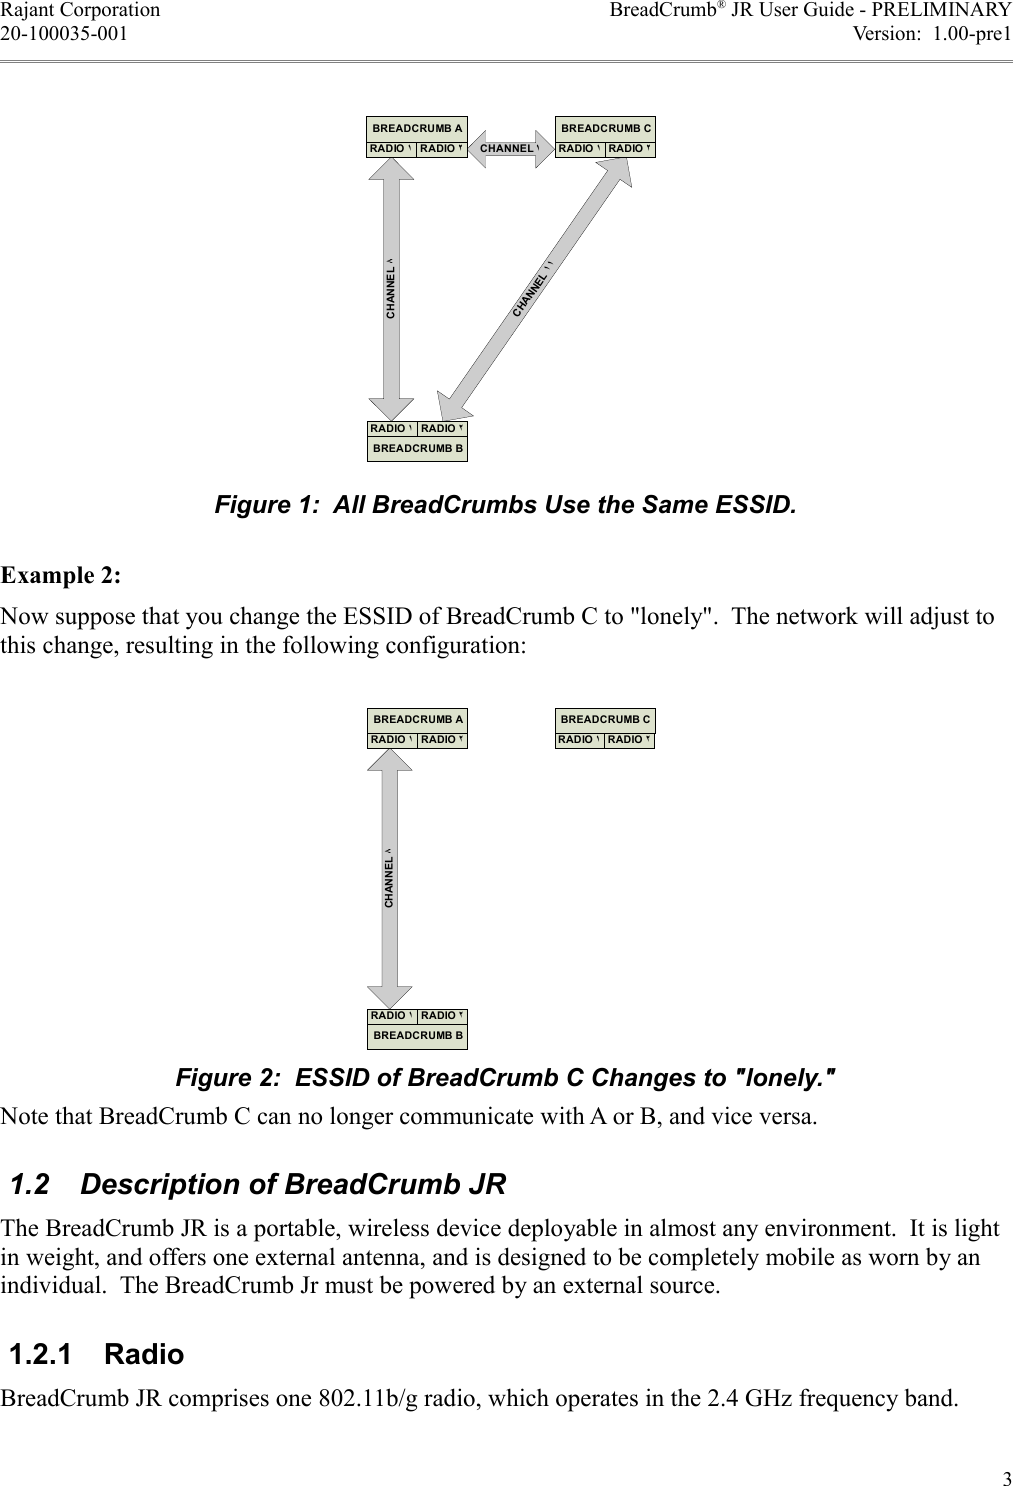 Rajant Corporation BreadCrumb® JR User Guide - PRELIMINARY20-100035-001 Version:  1.00-pre1Example 2:Now suppose that you change the ESSID of BreadCrumb C to &quot;lonely&quot;.  The network will adjust to this change, resulting in the following configuration:Note that BreadCrumb C can no longer communicate with A or B, and vice versa. 1.2  Description of BreadCrumb JRThe BreadCrumb JR is a portable, wireless device deployable in almost any environment.  It is light in weight, and offers one external antenna, and is designed to be completely mobile as worn by an individual.  The BreadCrumb Jr must be powered by an external source.,*-*, BreadCrumb JR comprises one 802.11b/g radio, which operates in the 2.4 GHz frequency band.3Figure 1:  All BreadCrumbs Use the Same ESSID.:::;5&lt;.5:5:.5&lt;5:.5&lt;Figure 2:  ESSID of BreadCrumb C Changes to &quot;lonely.&quot;;5&lt;.5:5:.5&lt;5&lt;.5: